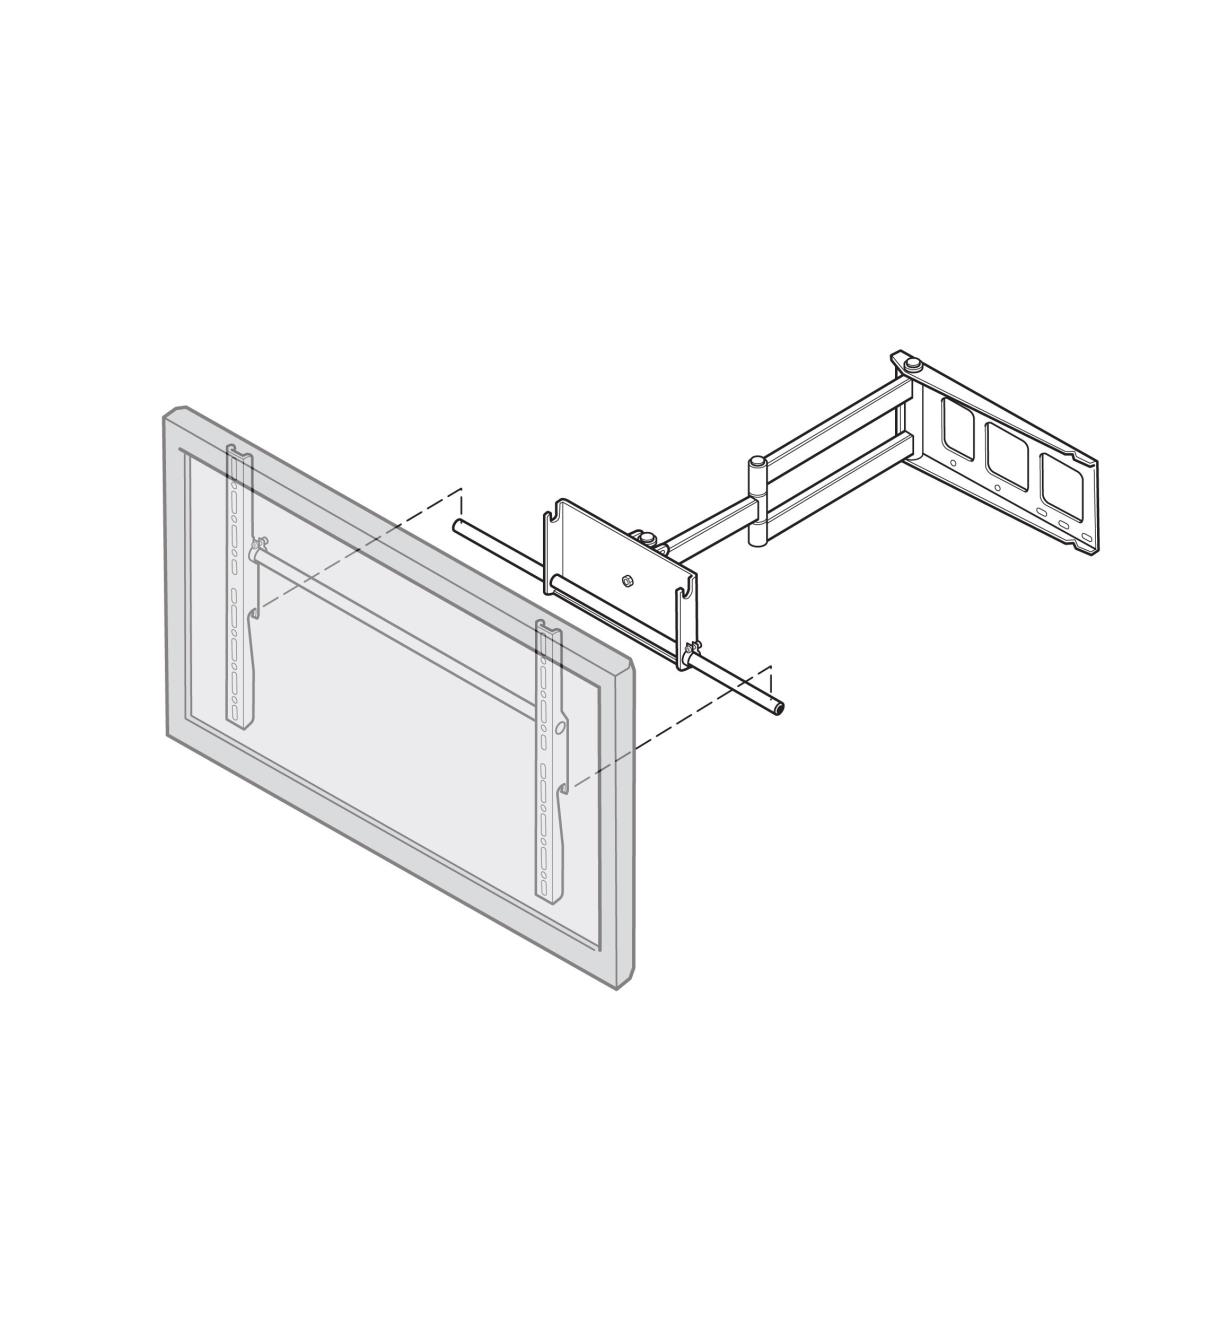 00K7952 - 42" to 70" Articulated Wall Mount